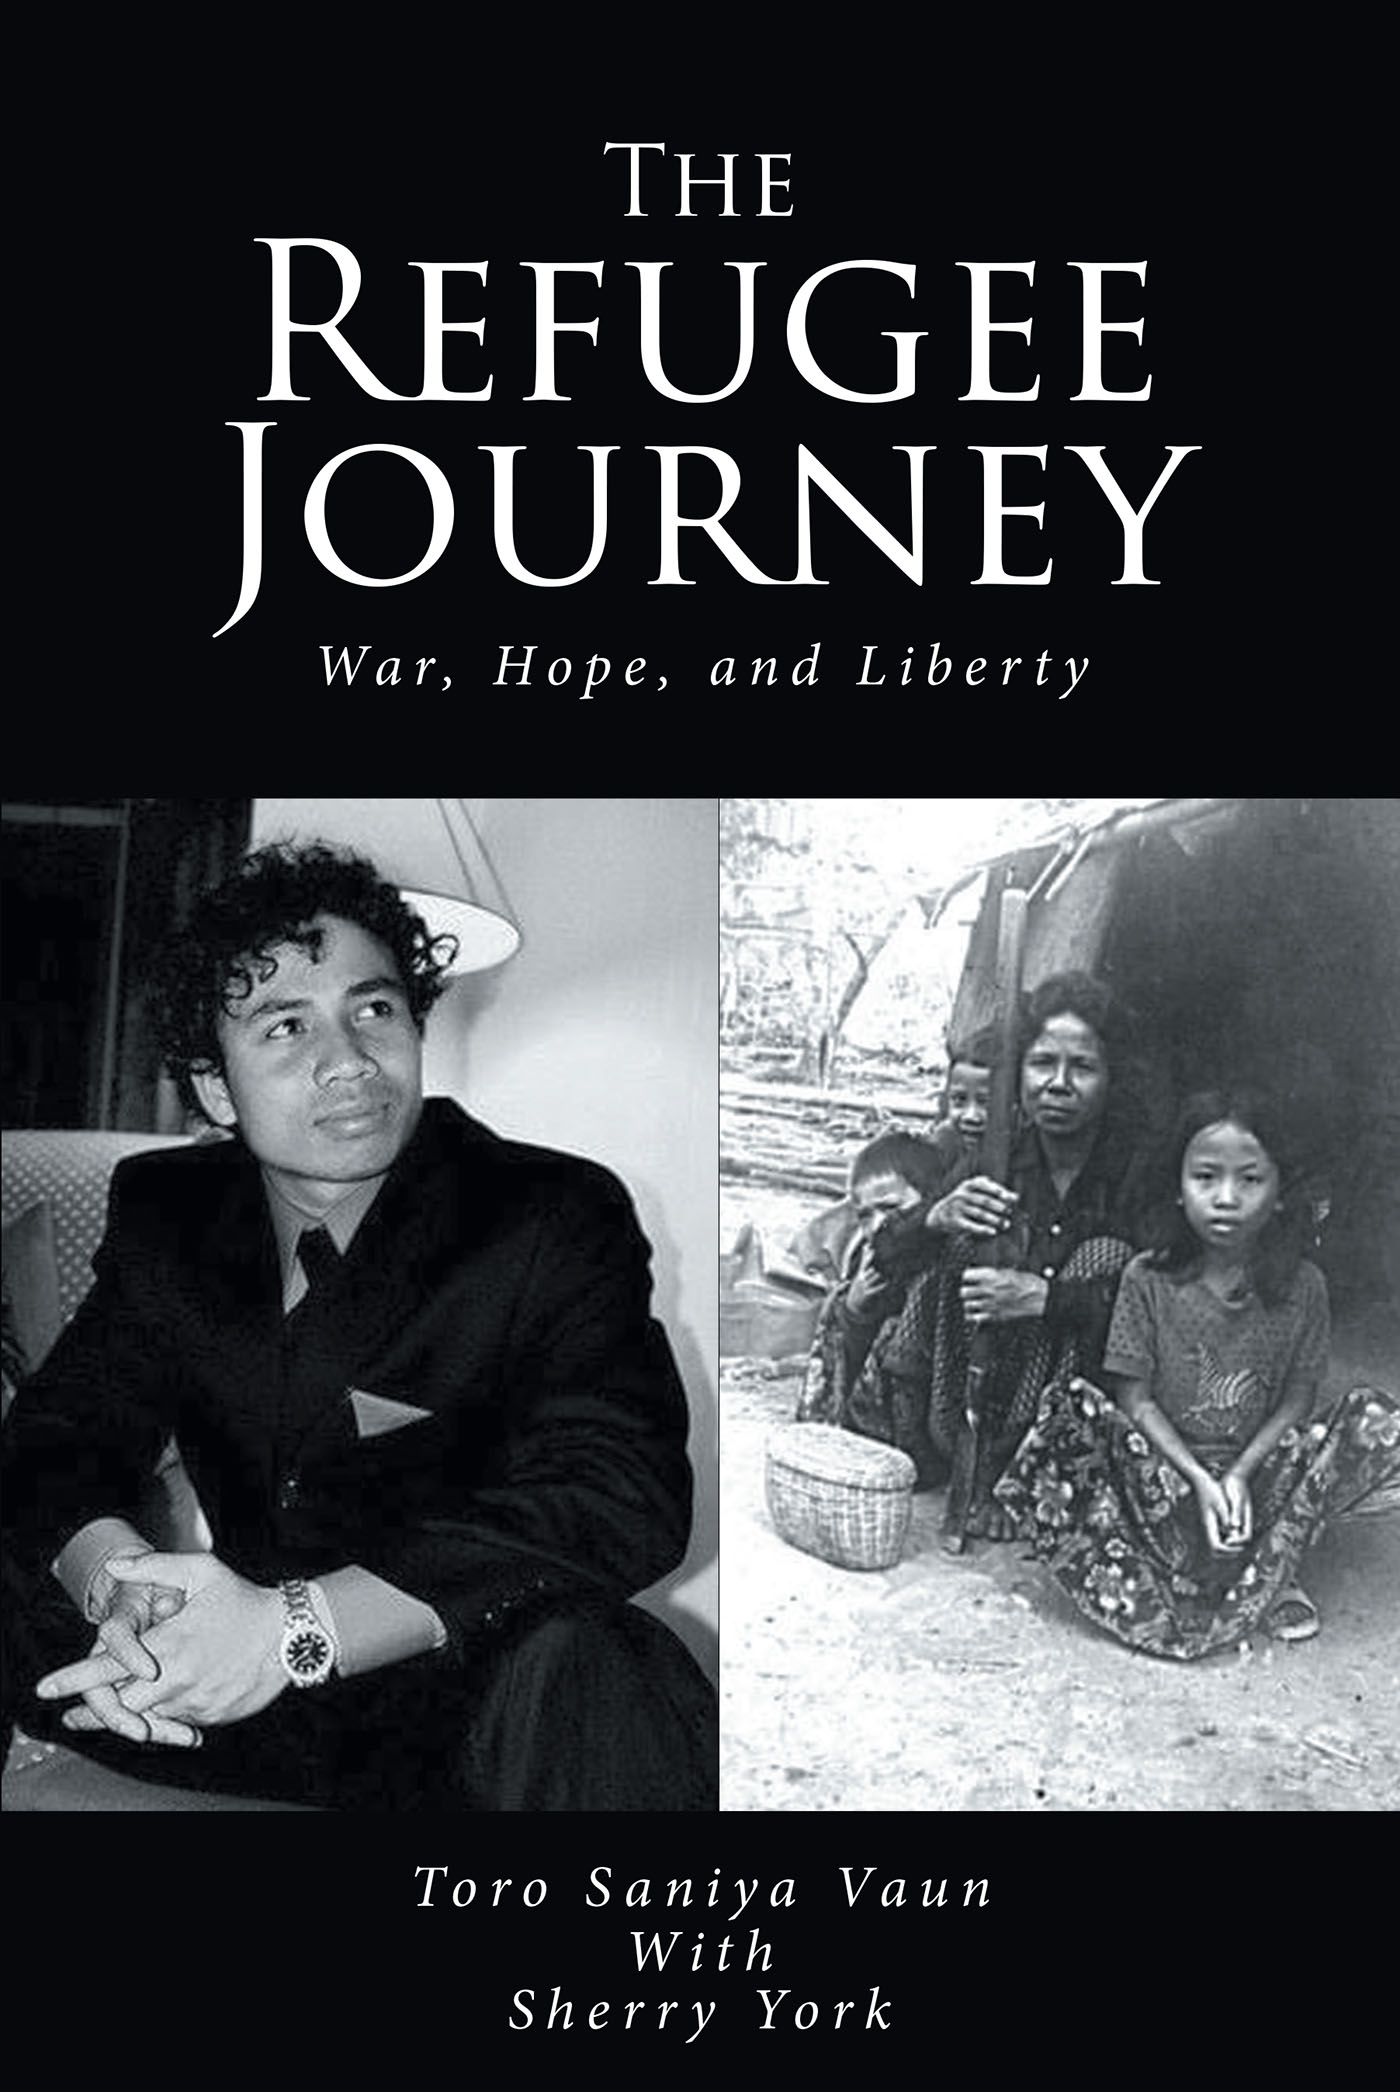 Toro Saniya Vaun’s New Book, "The Refugee Journey: War, Hope, and Liberty," is a Story of Destruction and Rebirth, Endings and New Beginnings, and God’s Promise of Peace